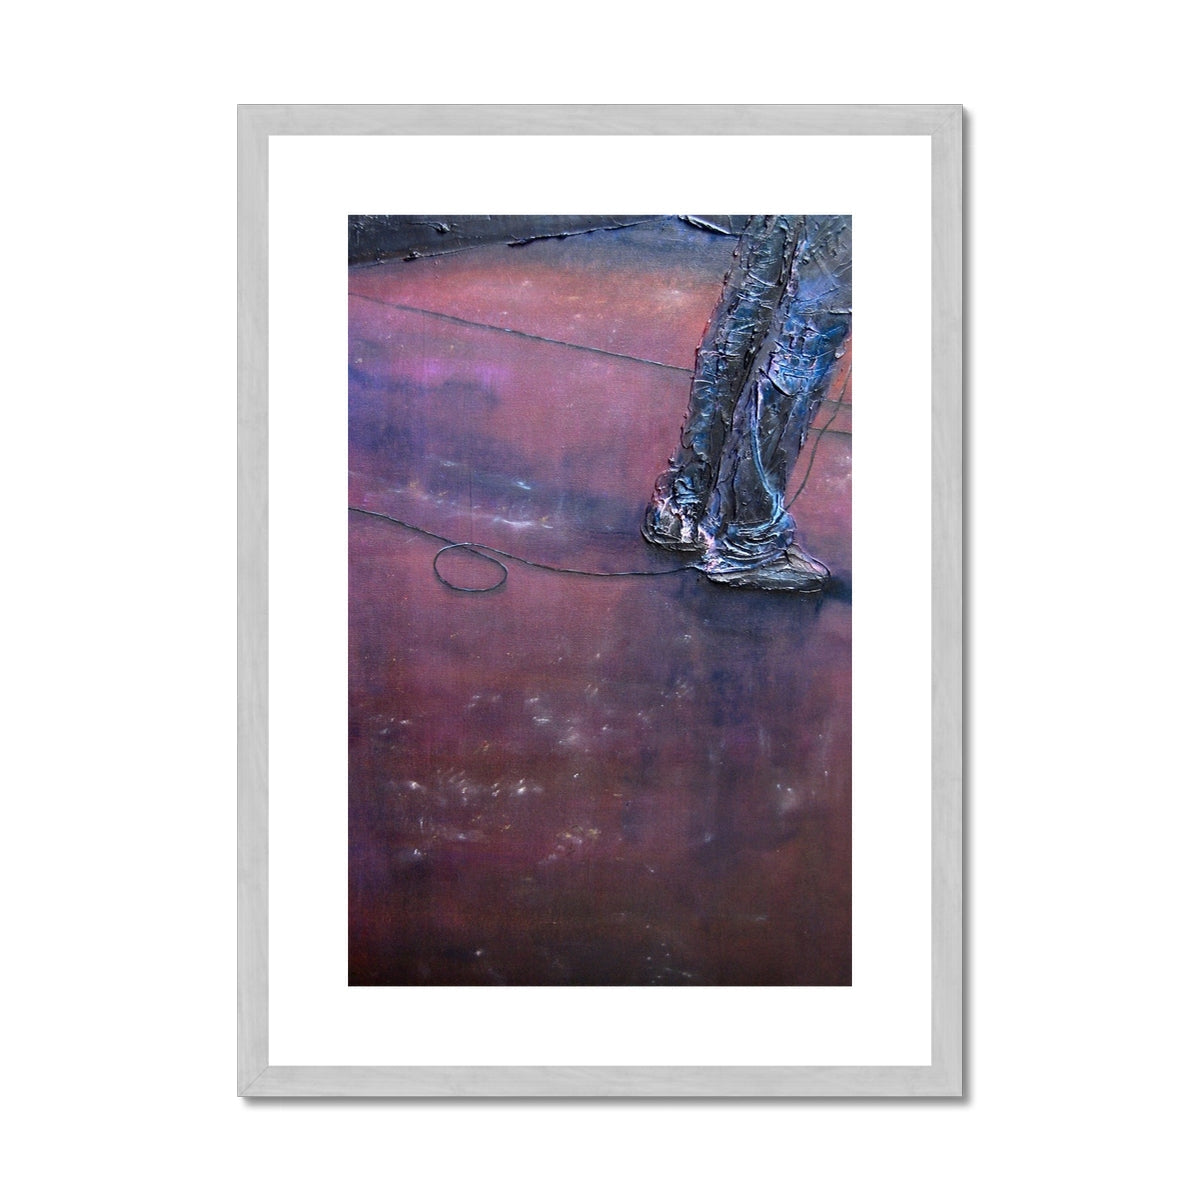 Soundcheck Glasgow Barrowlands Painting | Antique Framed & Mounted Prints From Scotland-Antique Framed & Mounted Prints-Edinburgh & Glasgow Art Gallery-A2 Portrait-Silver Frame-Paintings, Prints, Homeware, Art Gifts From Scotland By Scottish Artist Kevin Hunter